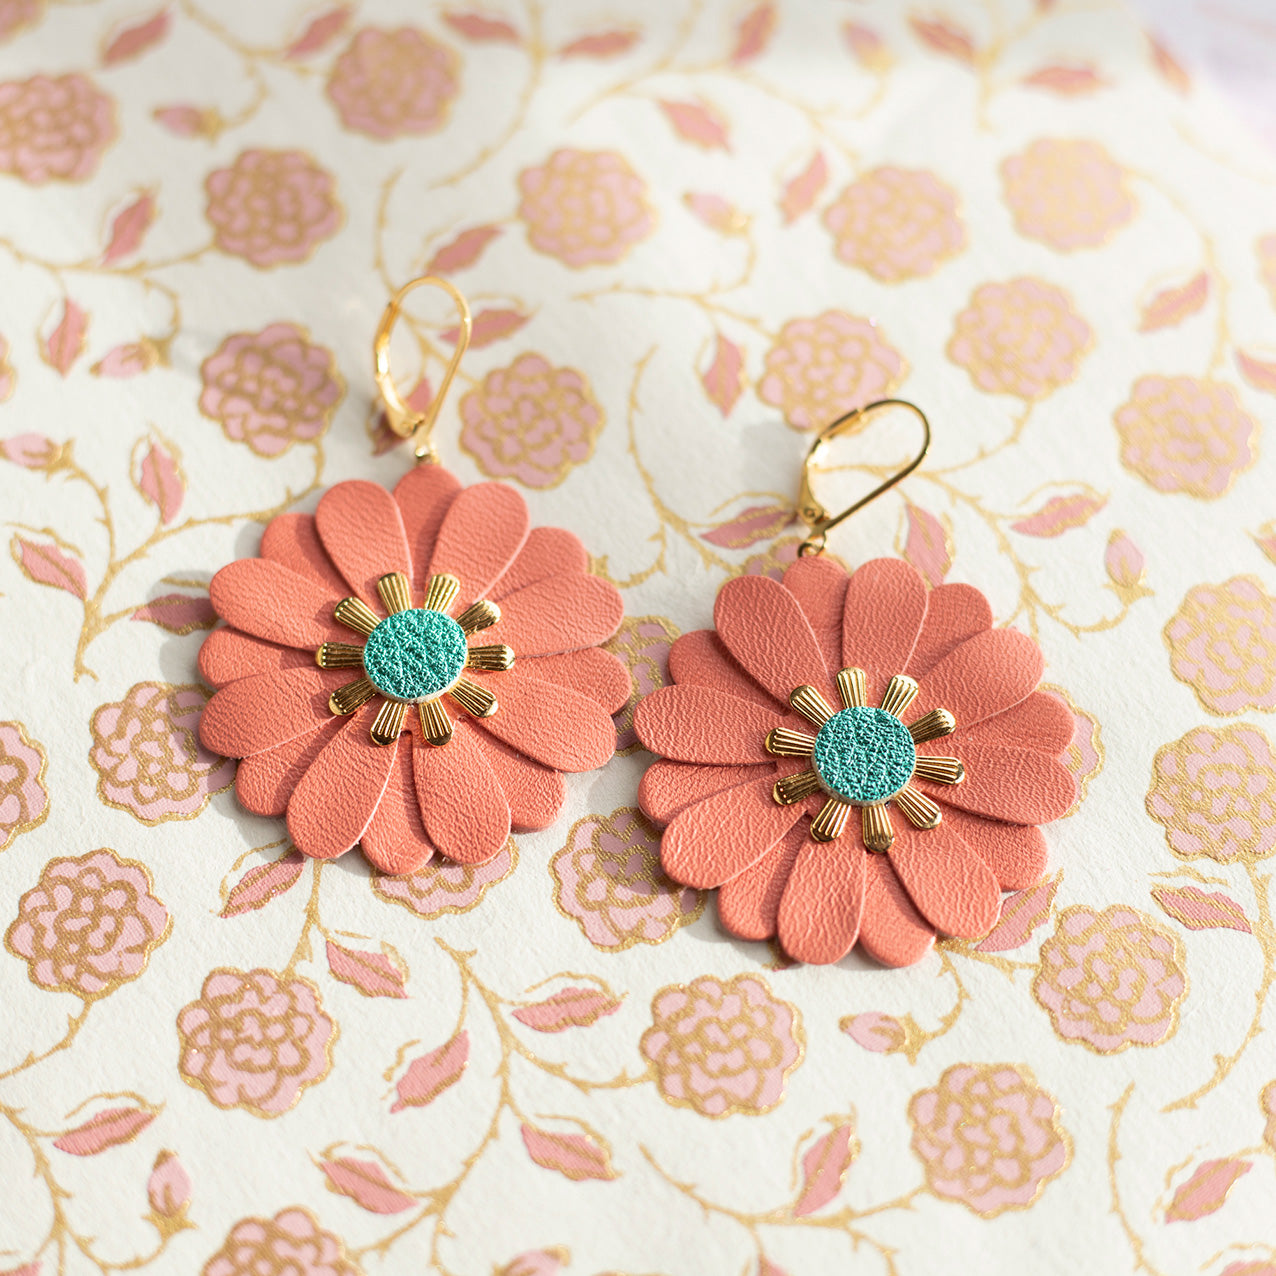 Zinnia flower earrings - coral pink leather